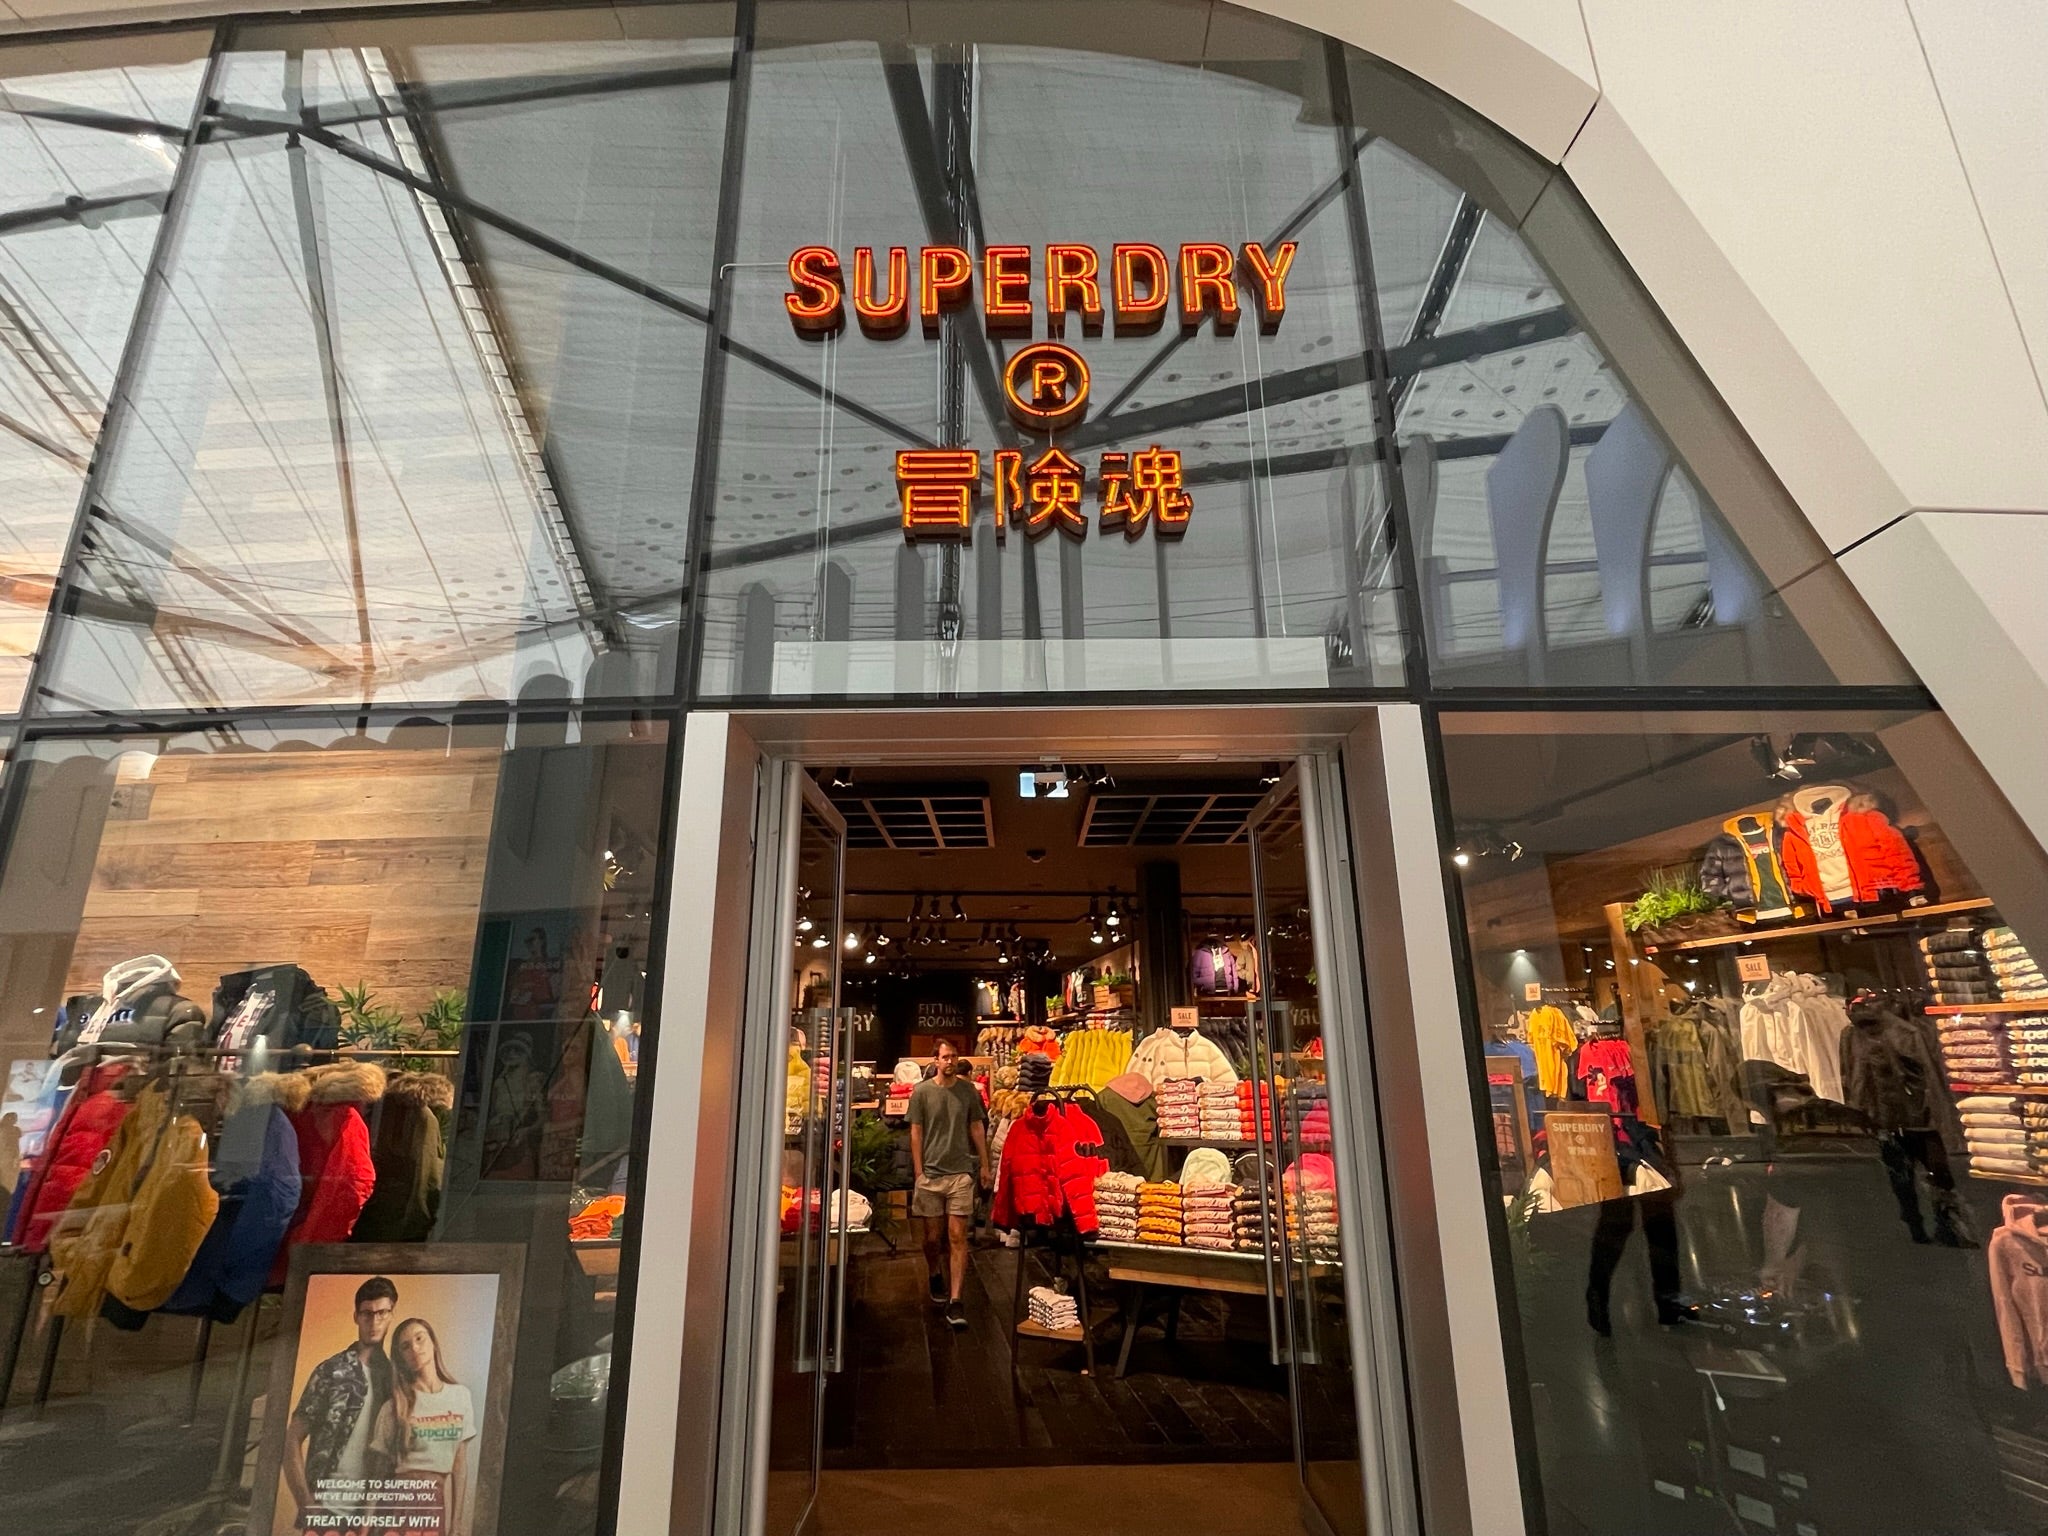 Anchor brand Superdry opens at Icon Outlet at The O2 as the